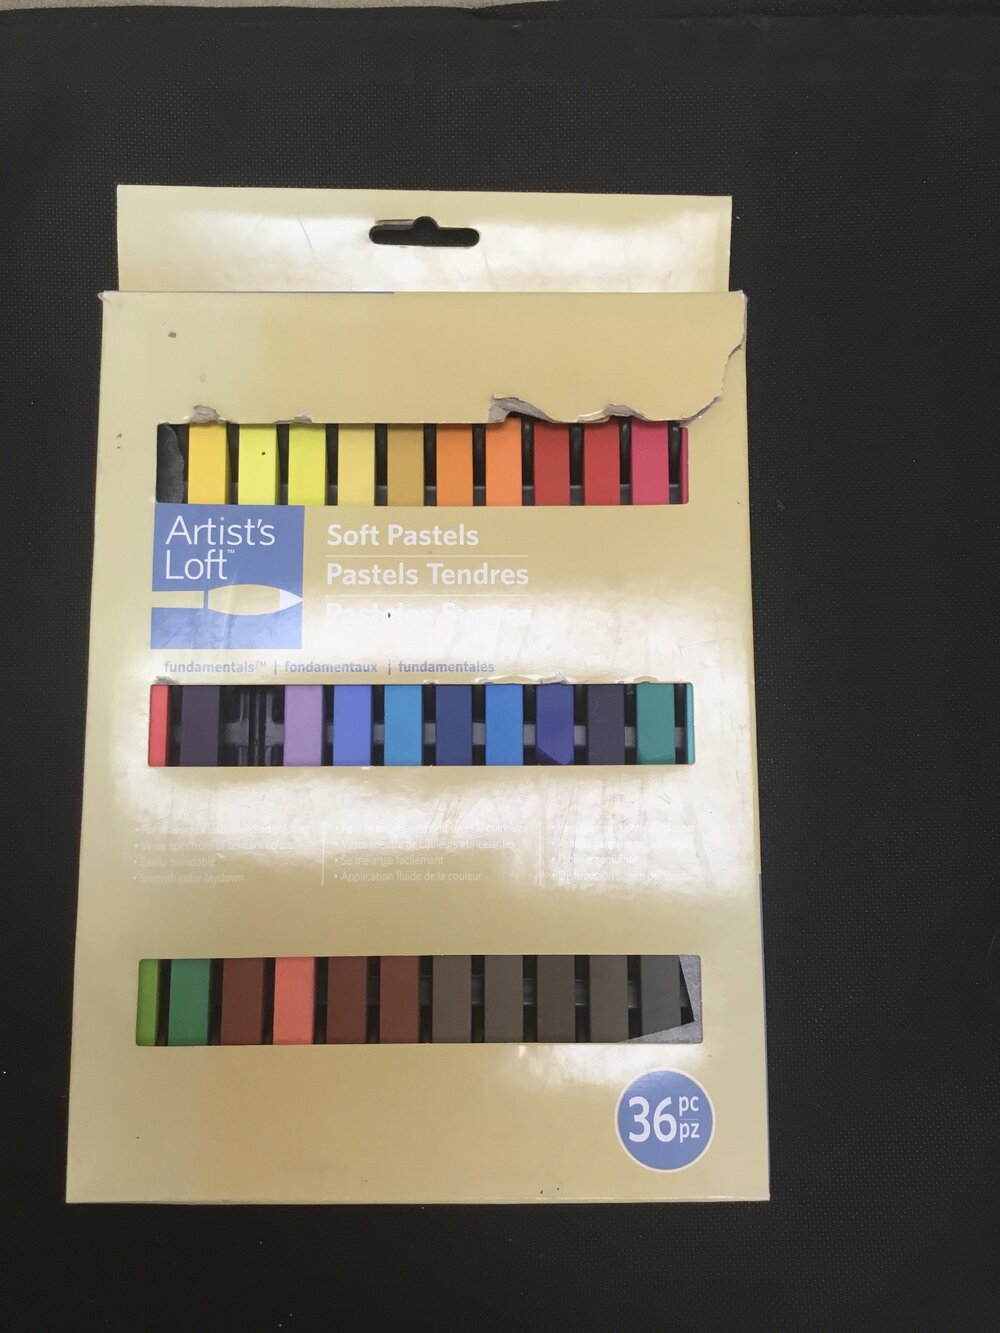 AS Artist's Loft Soft Pastels — CNY's #1 Art Classes! for Every SKILL